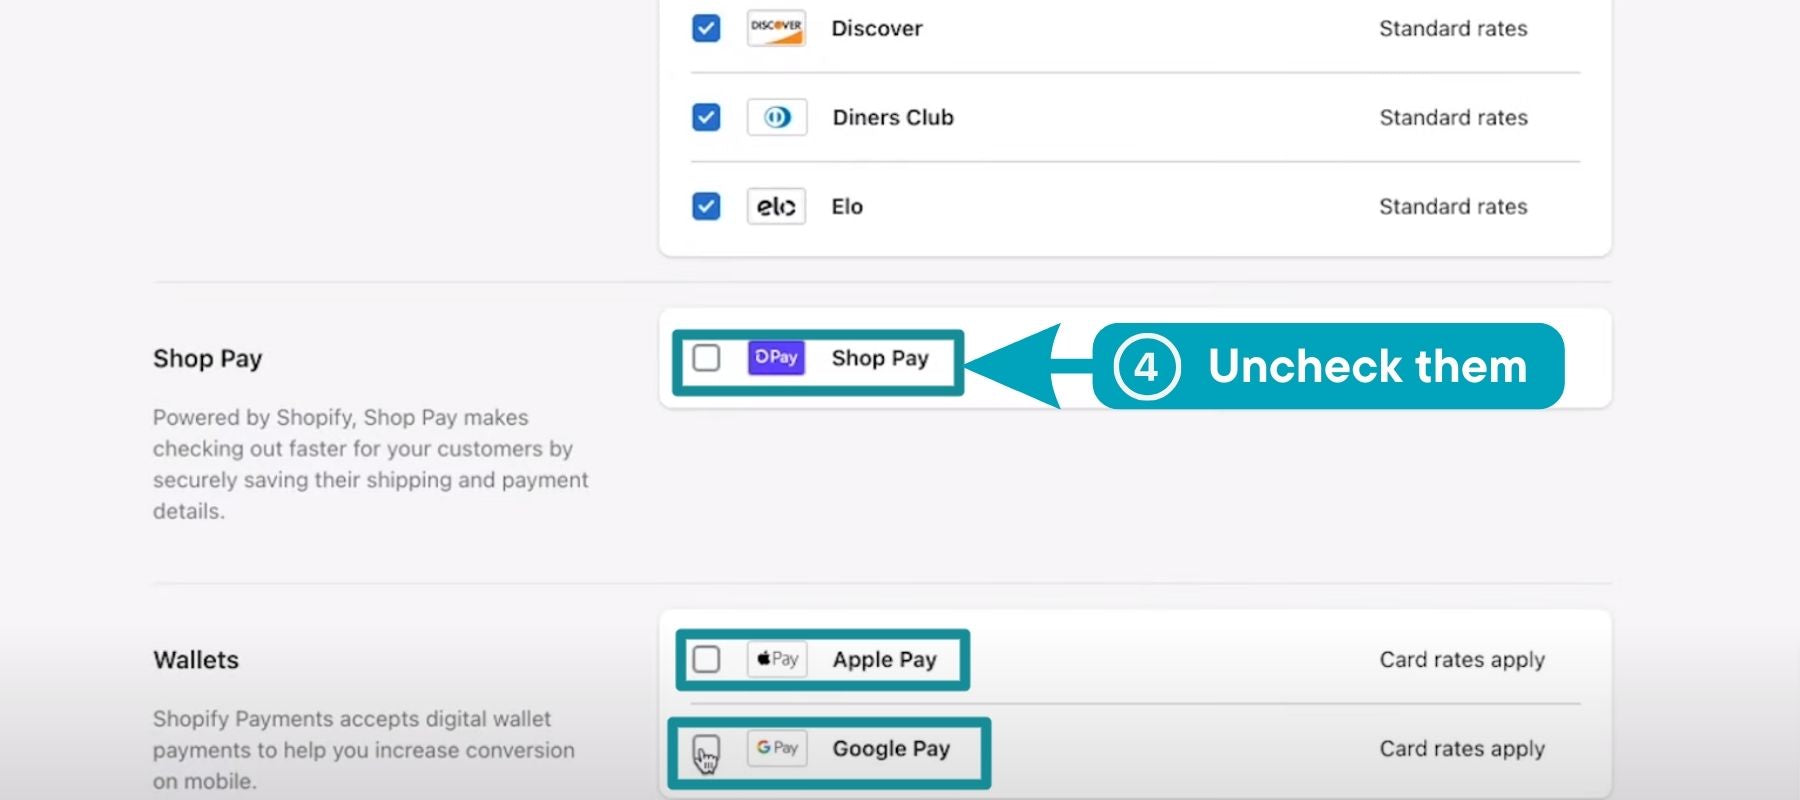 Disable Accelerated Payment Options